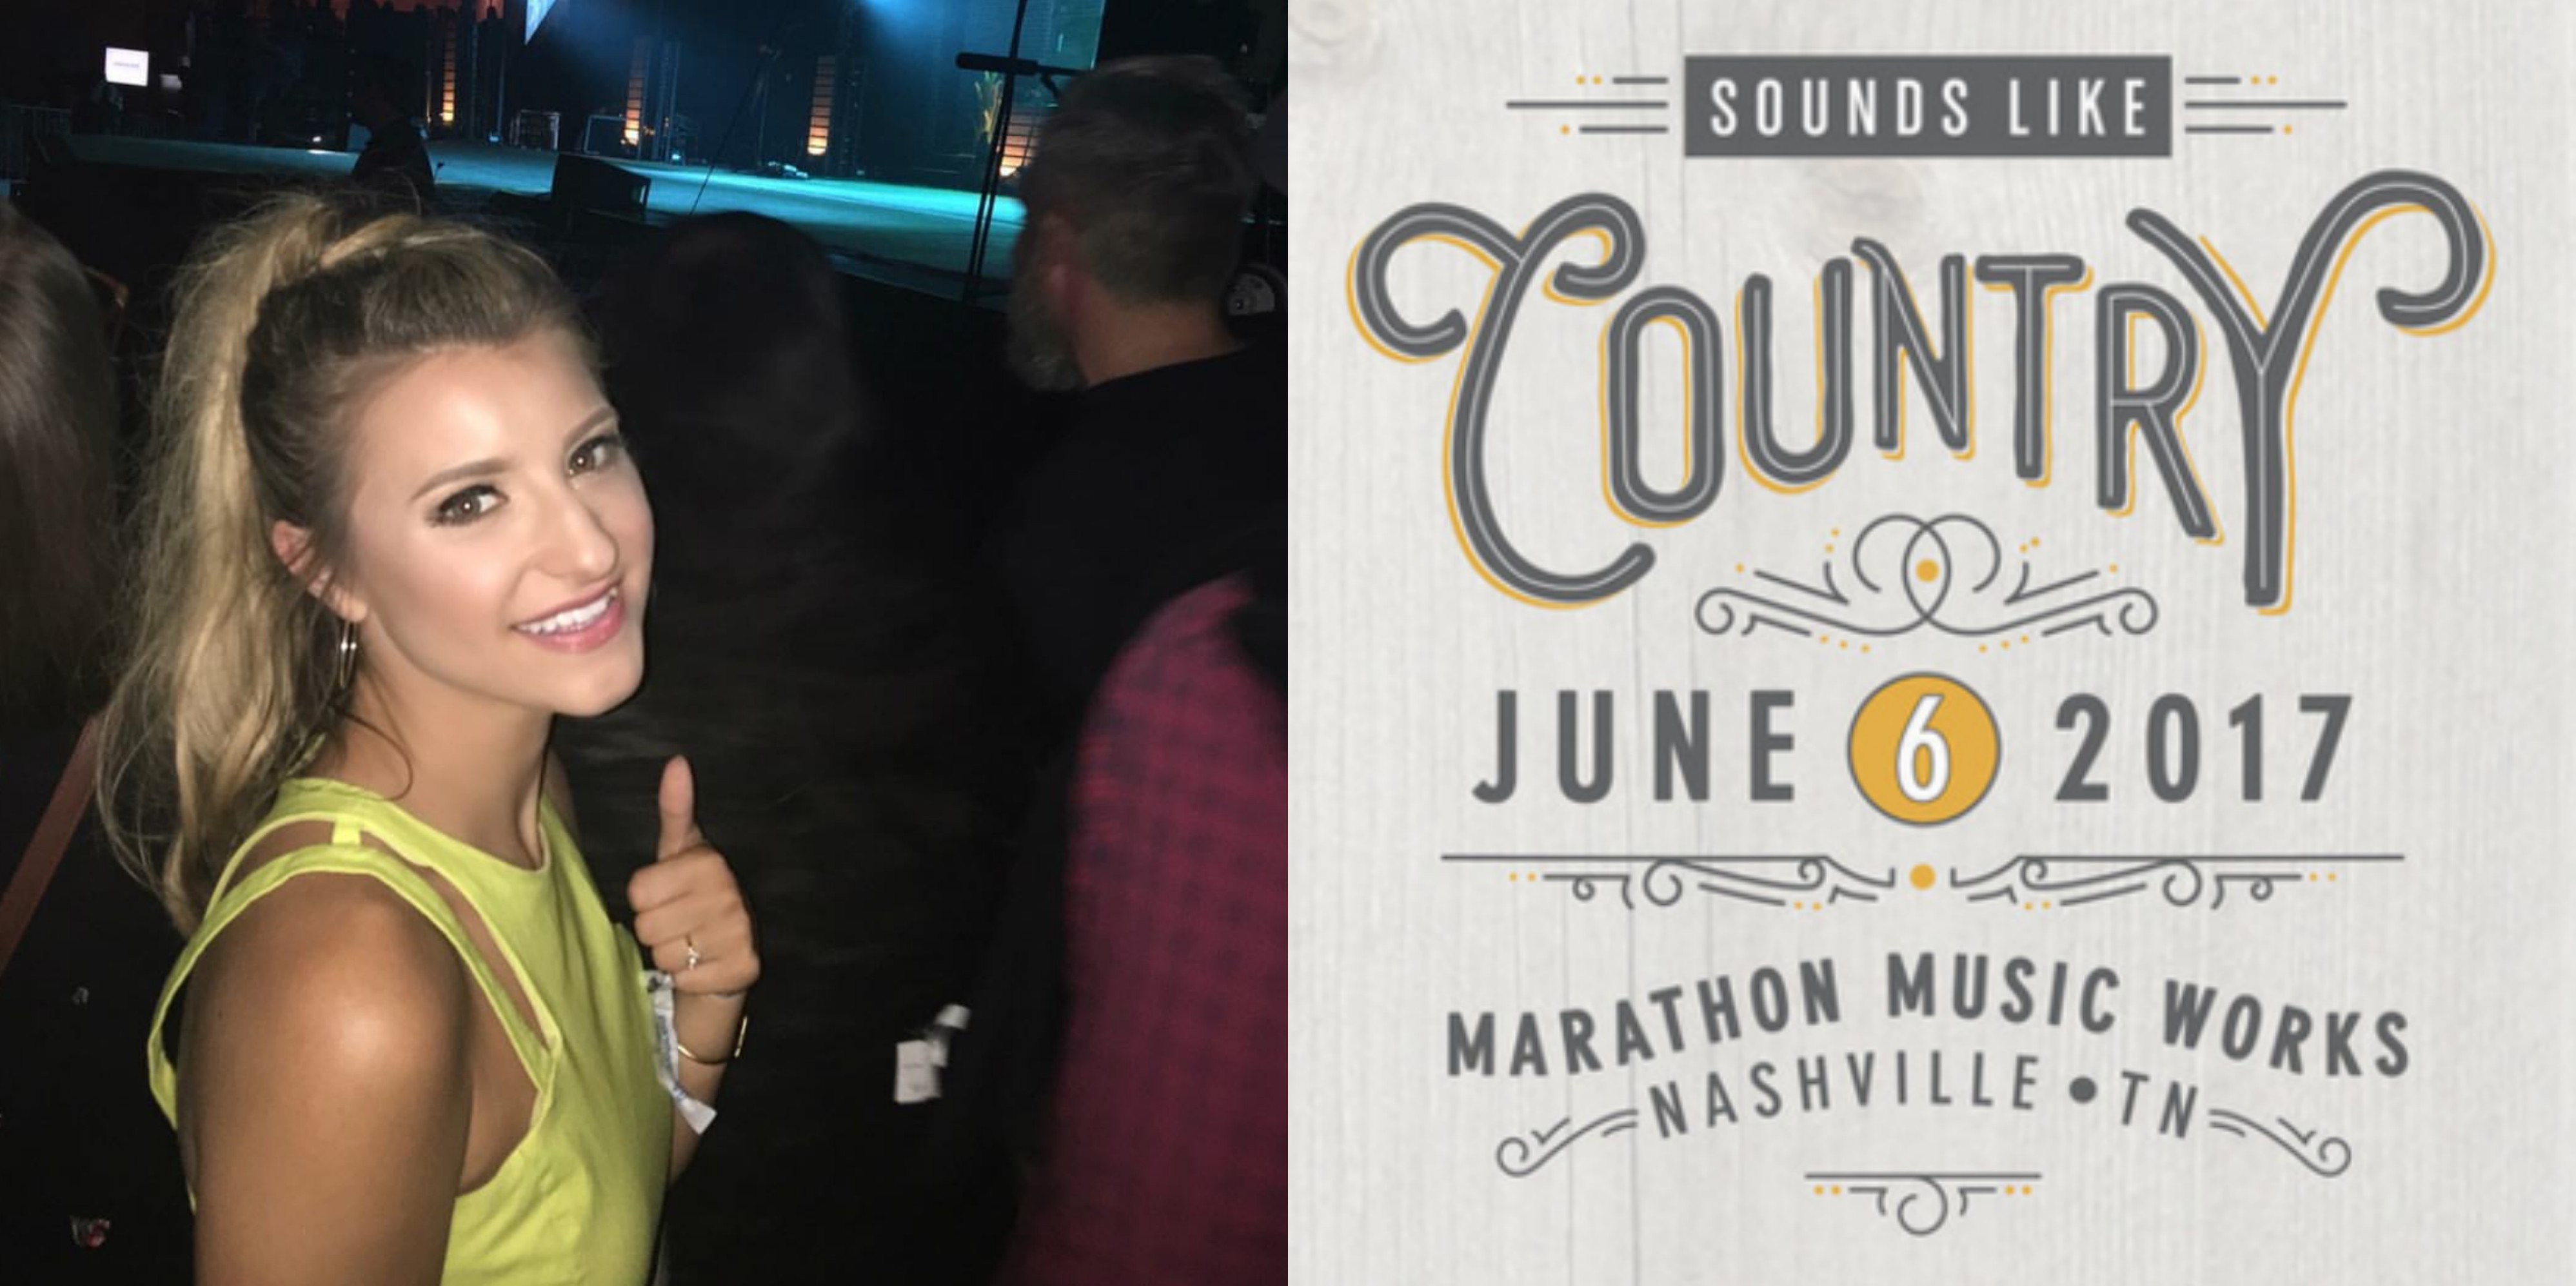 April Kry Takes Us to Pandora’s “Sounds Like Country” Concert – Exclusive